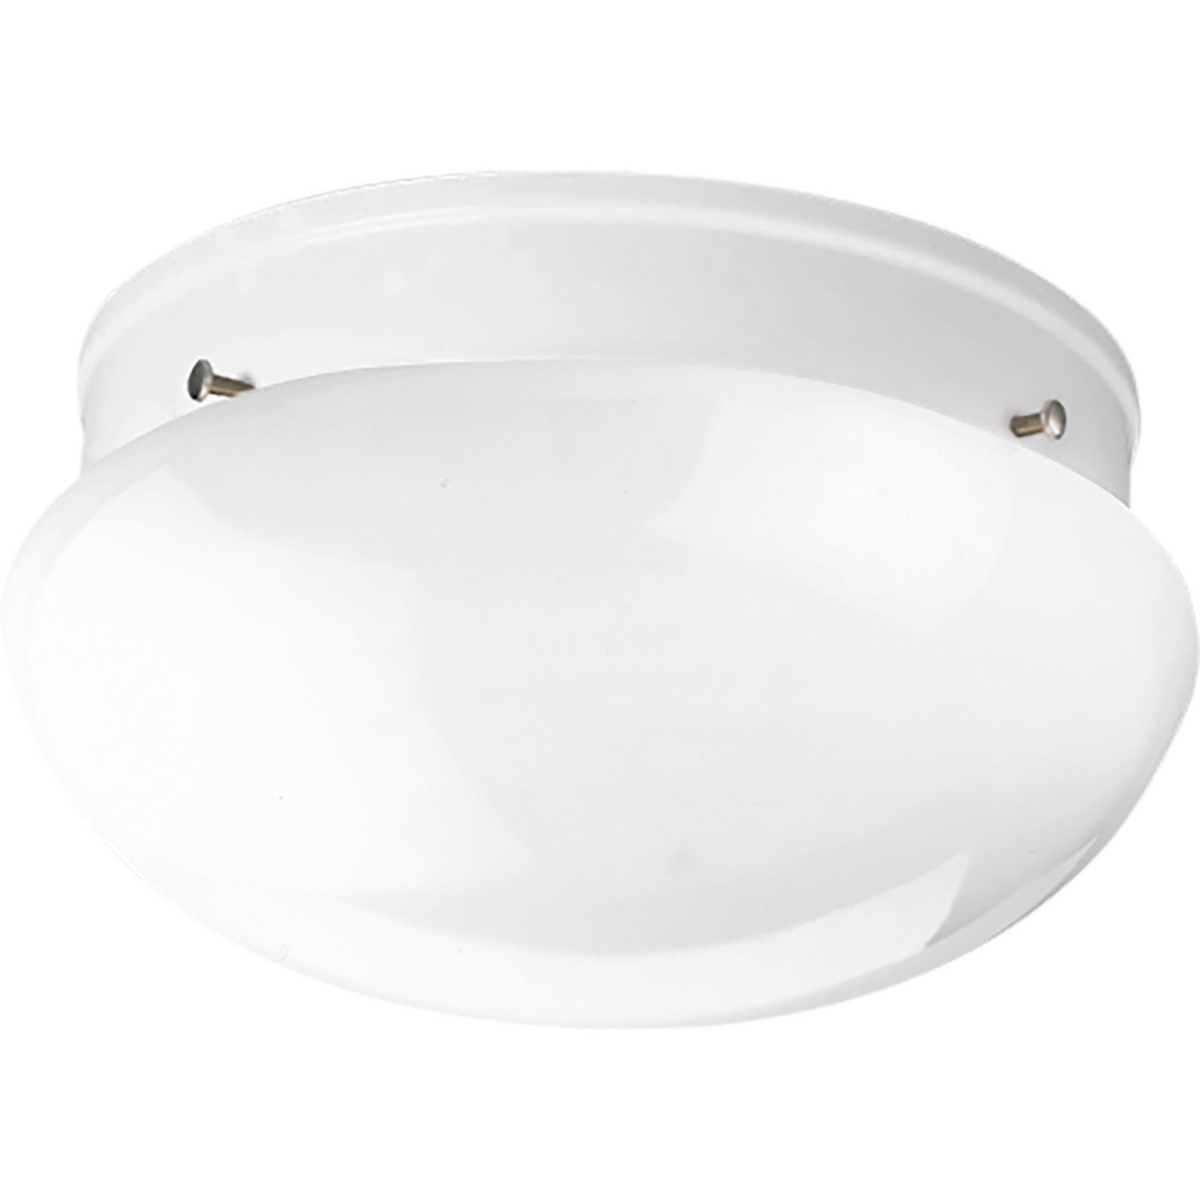 A traditional two-light close-to-ceiling fixture featuring a White glass bowl and a White finish. The fixture is ideal in a bathroom setting or hall/foyer.